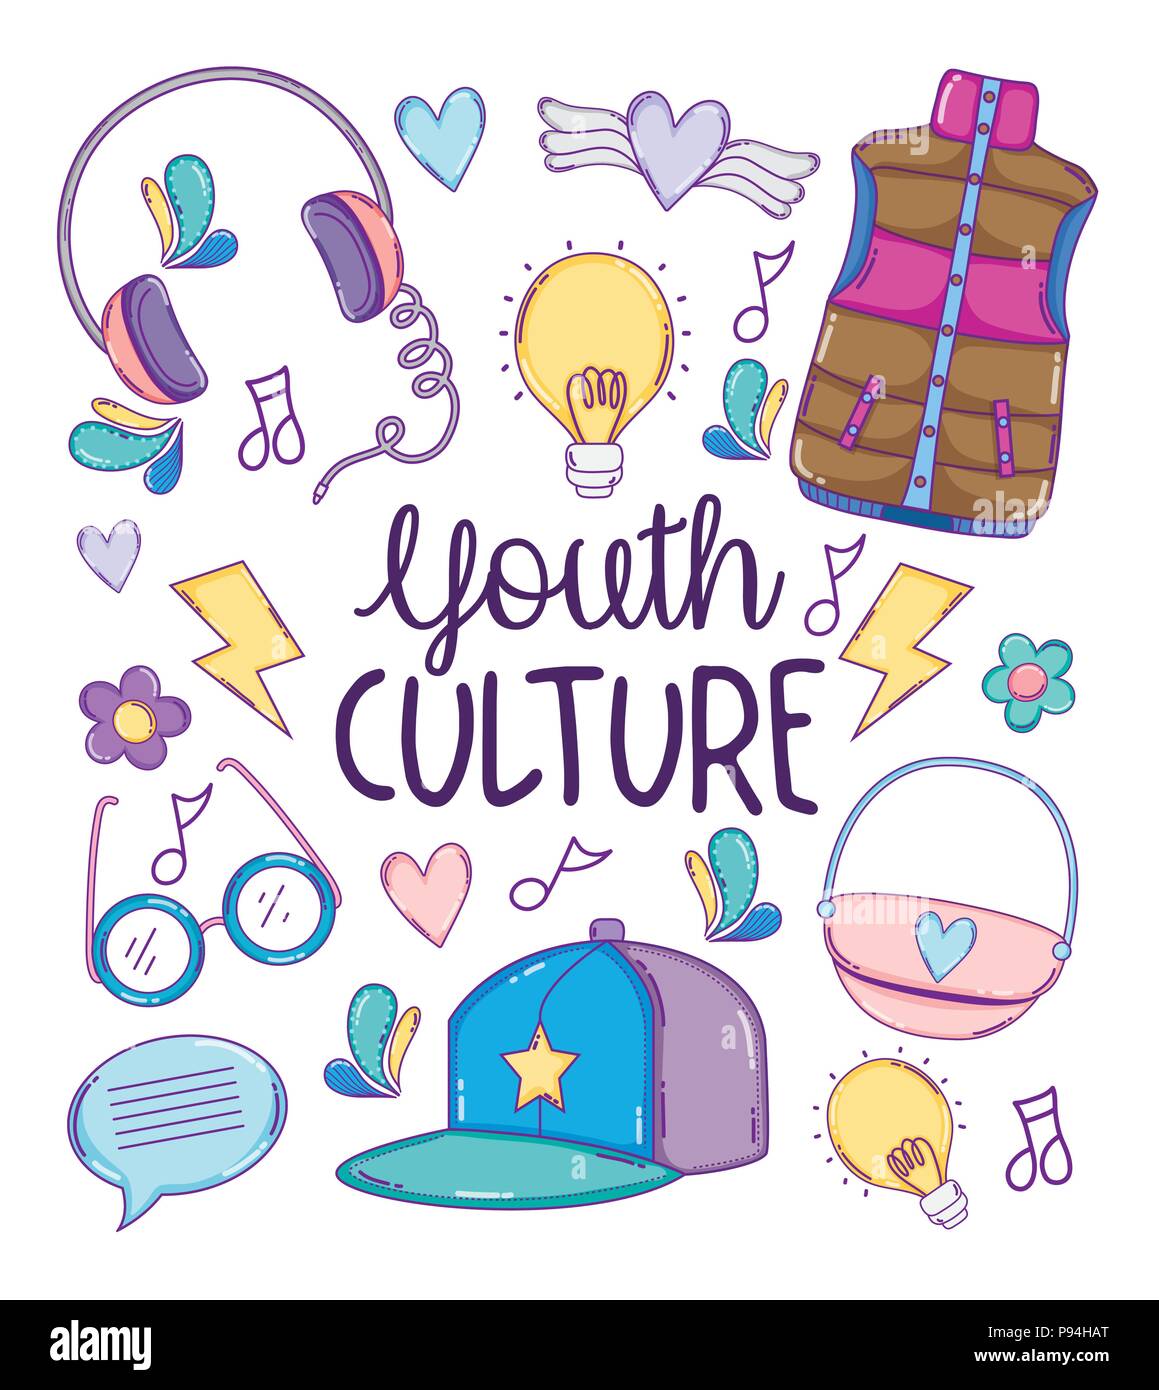 Youth culture cartoons Stock Vector